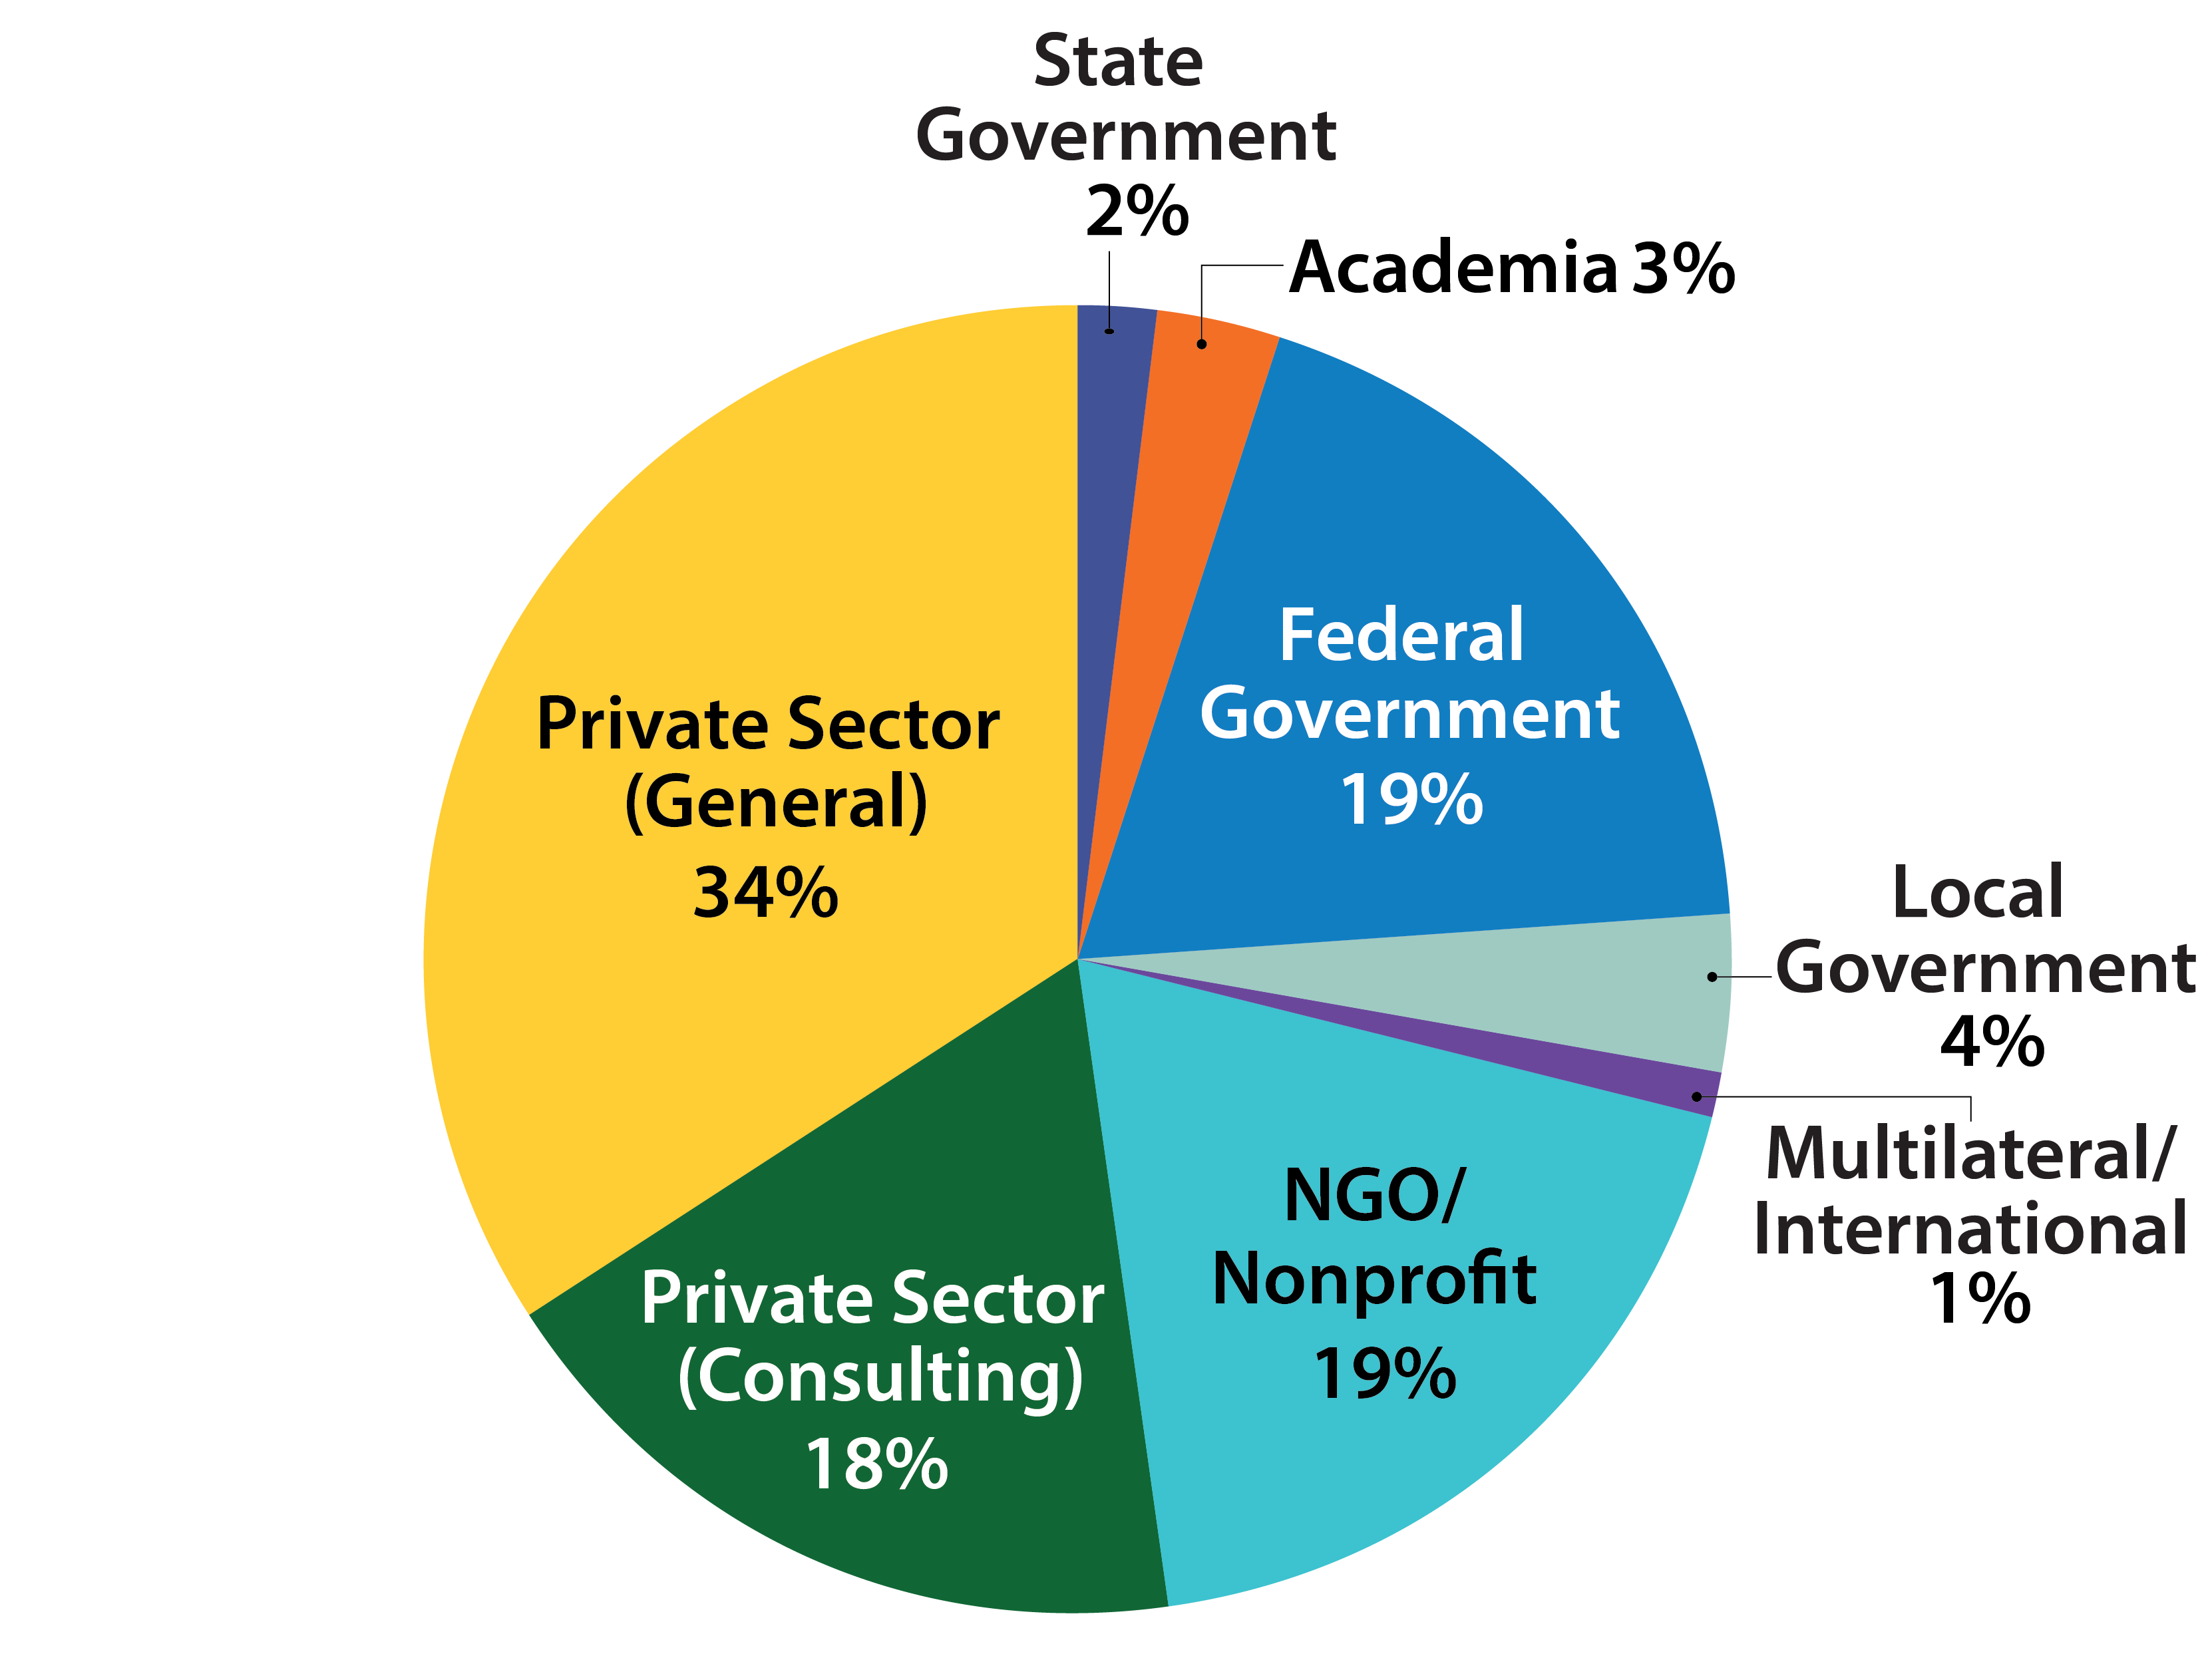 Pie chart: Federal government 19%, Local government 4%, Multilateral/International 1%, NGO/Nonprofit 19%, Private Sector (Consulting) 18%, Private Sector (General) 34%, State Government 2%, Academia 3%